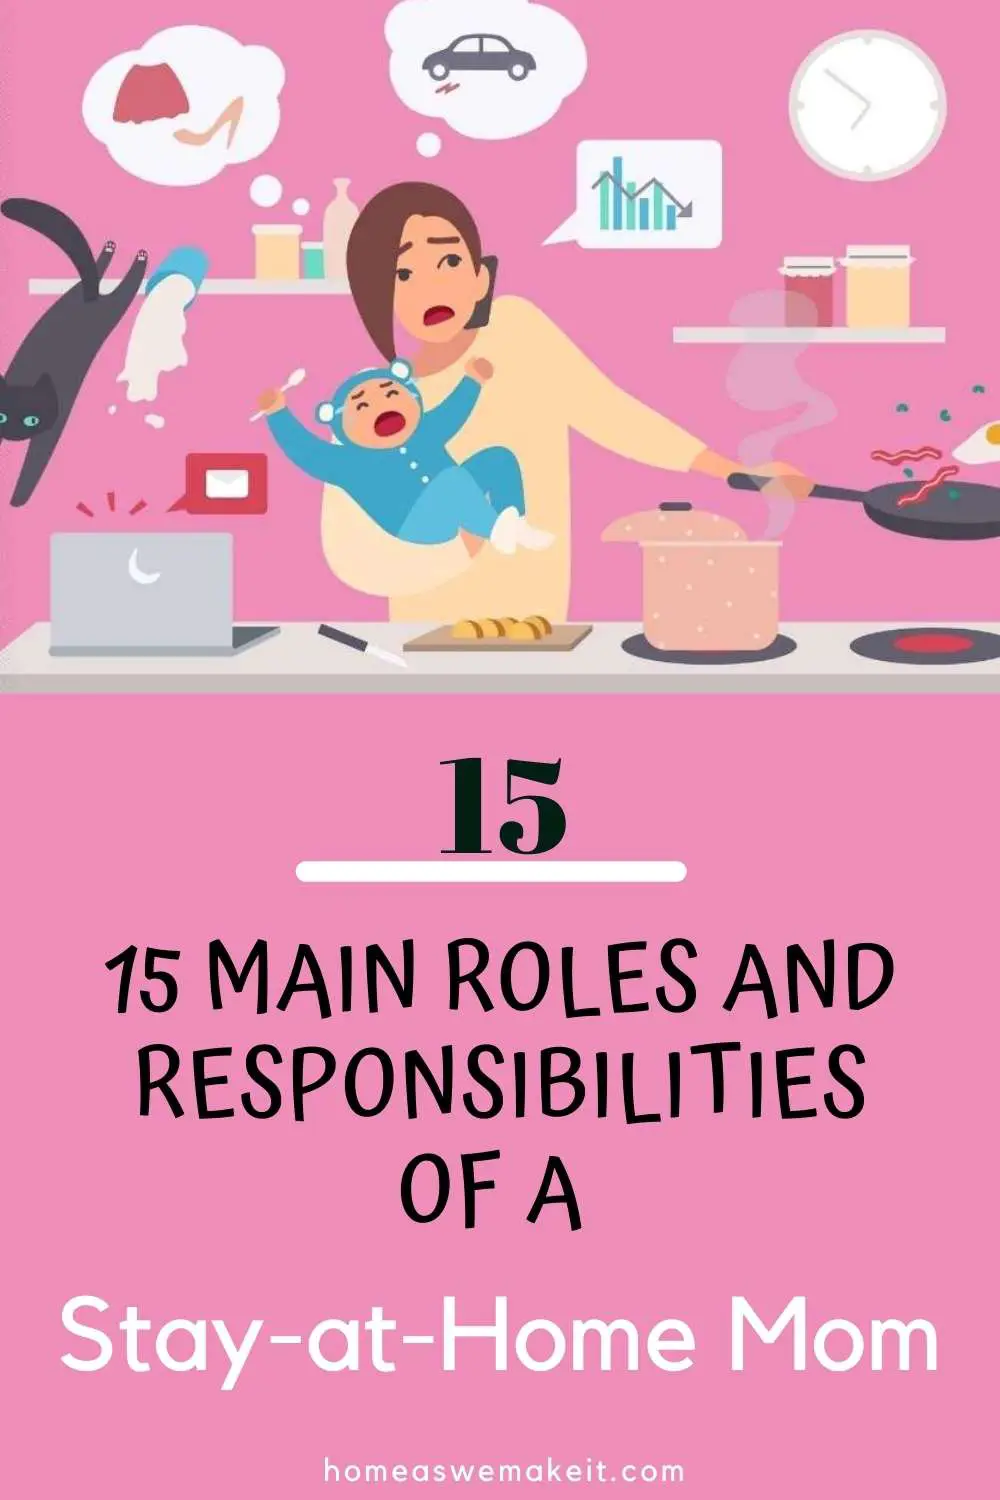 15 Main Roles and Responsibilities of a SAHM